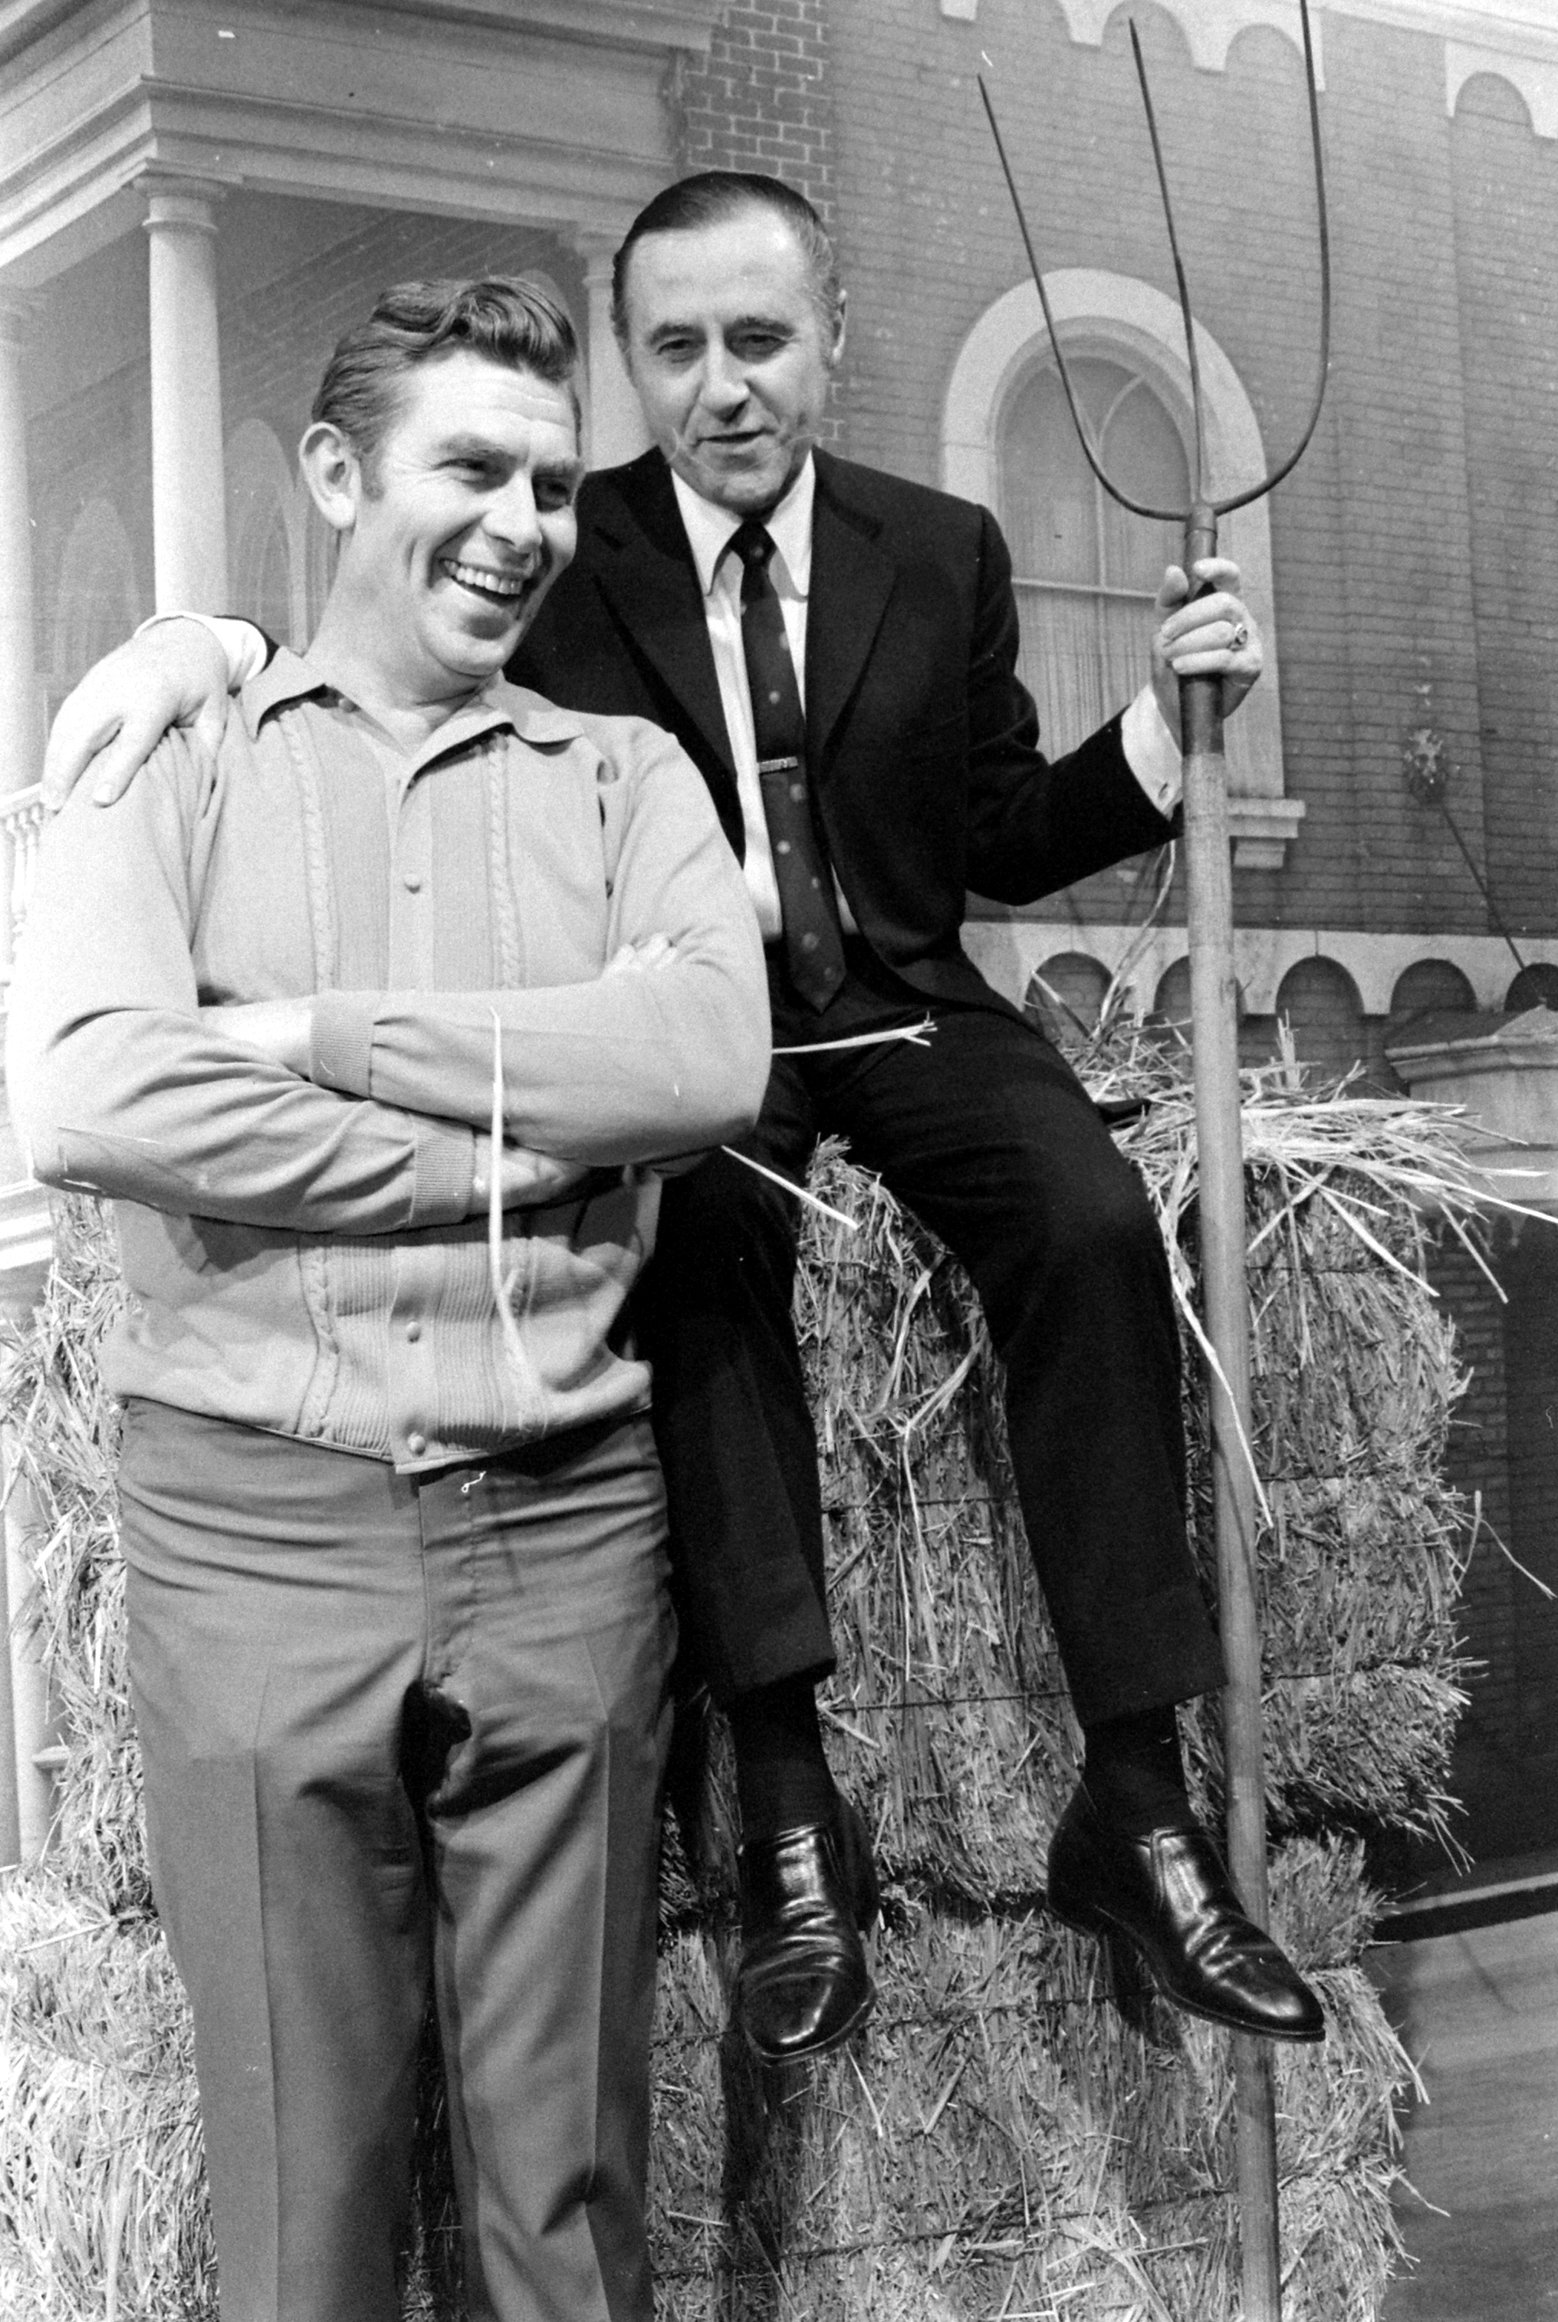 Actor Andy Griffith and his manager/producer Richard Linke pose for a photo as they sit on bales of hay, 1969